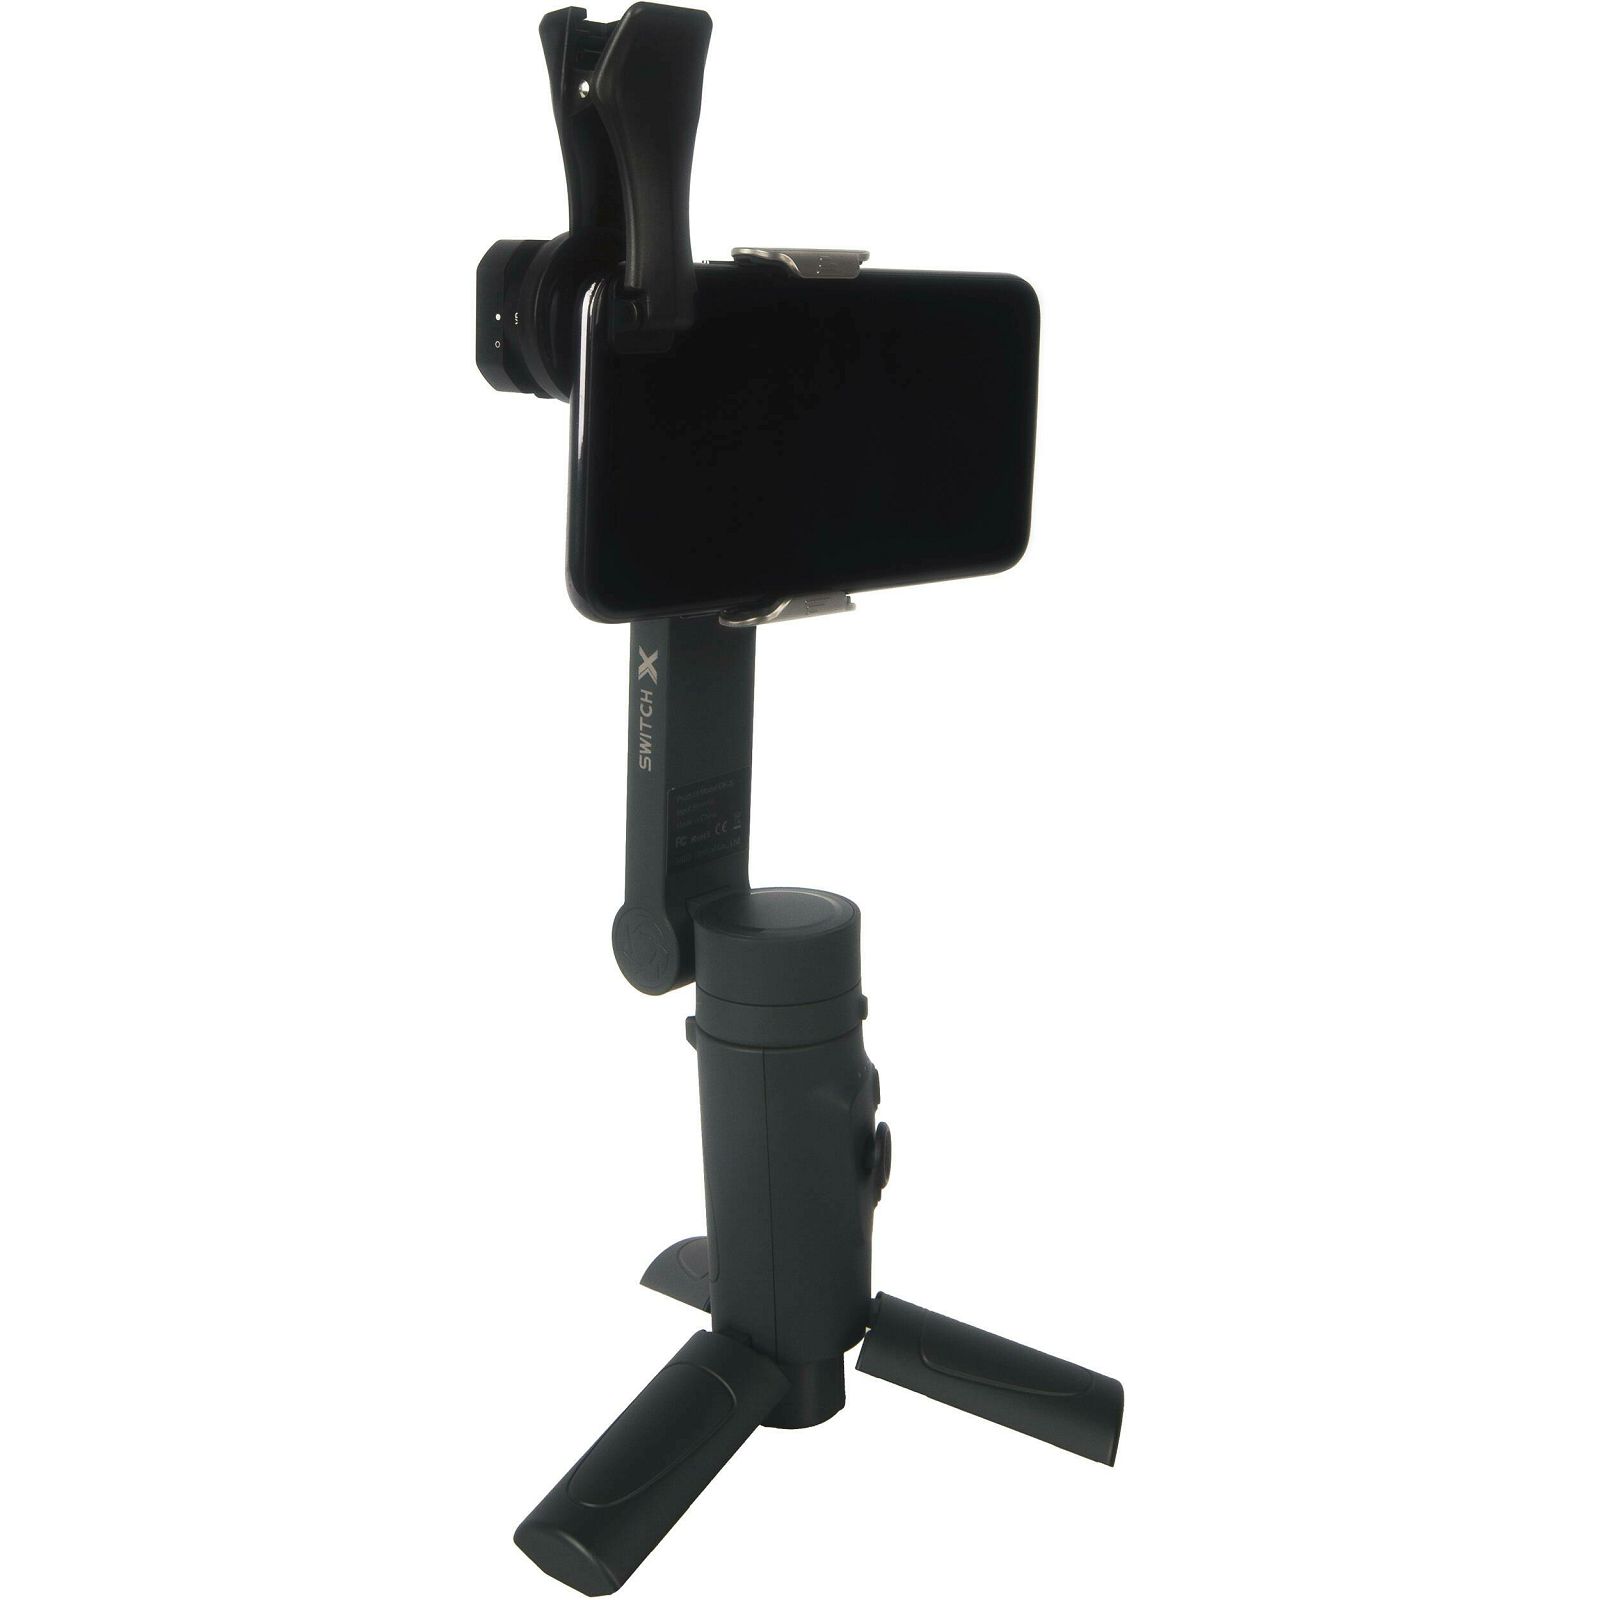 Sirui Duken DK-SD+VD-01 Switch X Smartphone Stabilizer Gimbal (Dark Grey) with Anamorphic Lens for Smartphone 